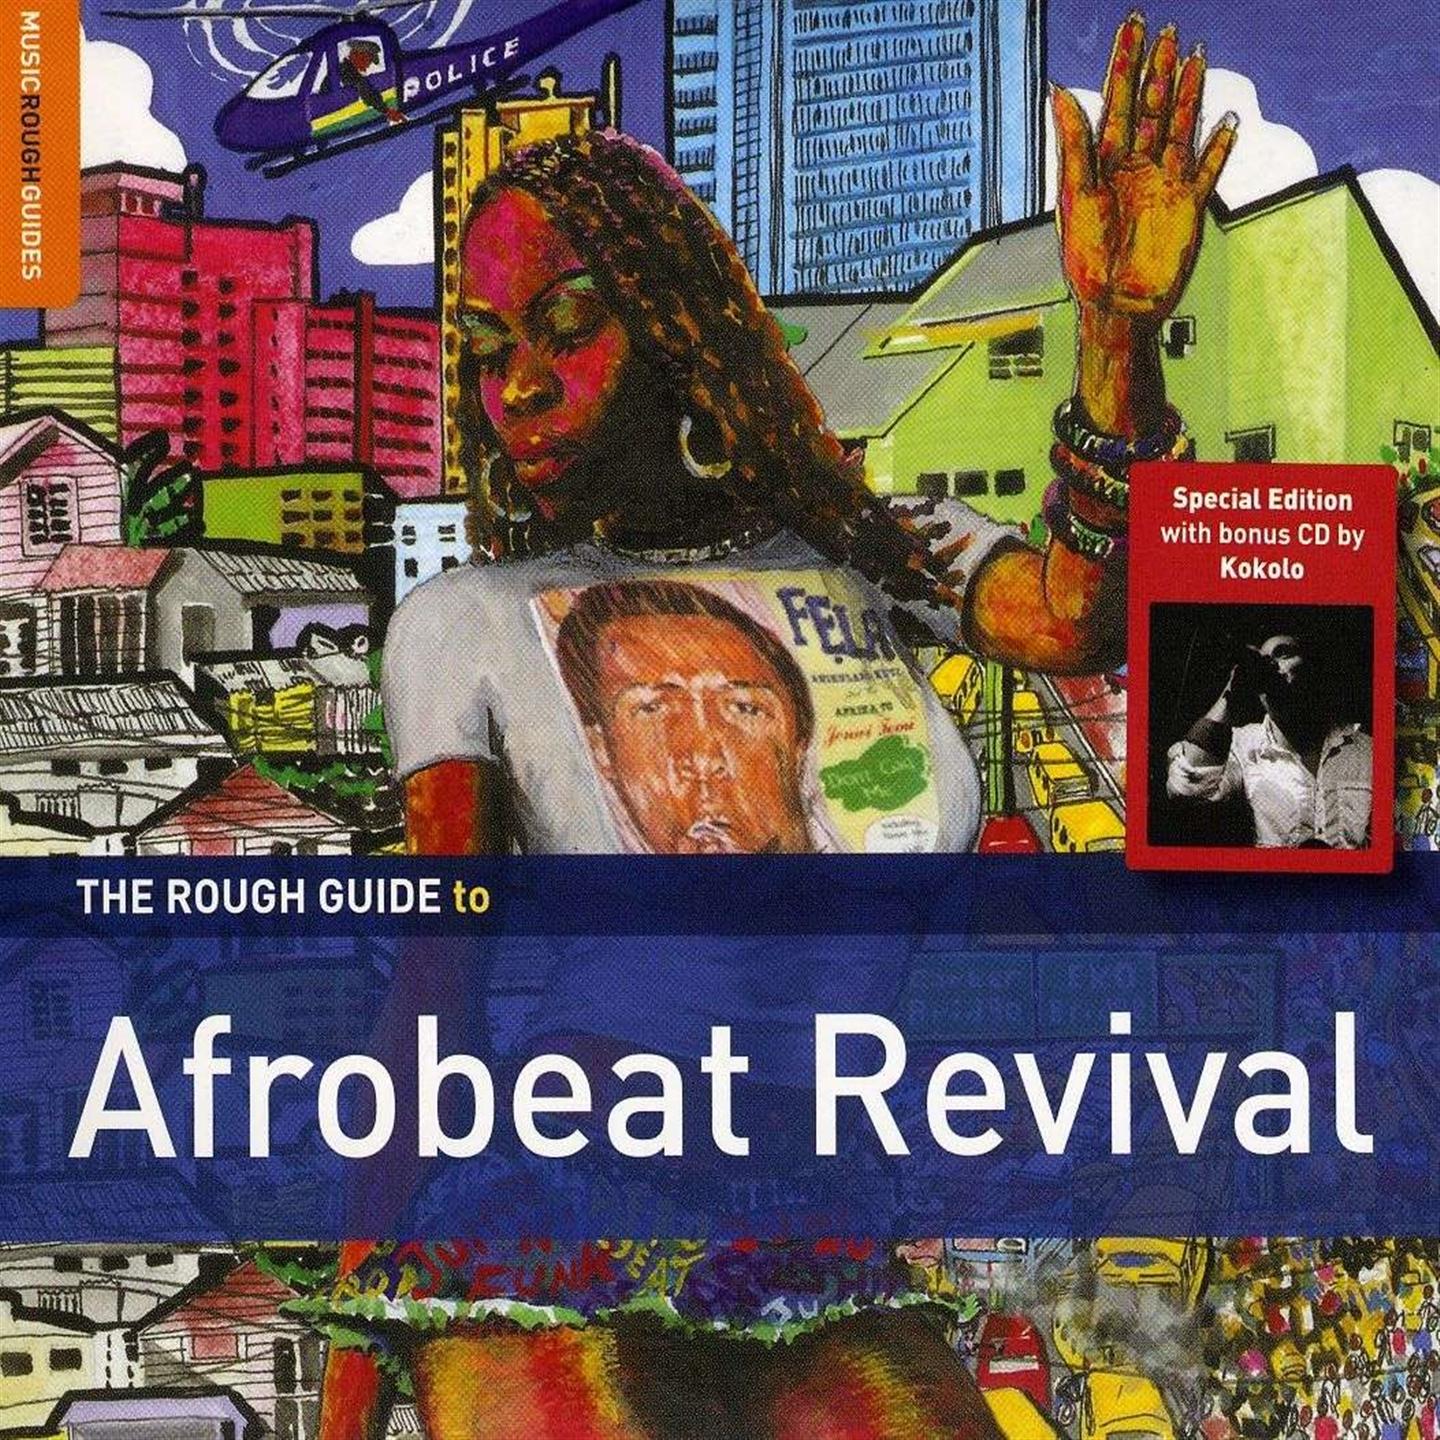 THE ROUGH GUIDE TO AFROBEAT REVIVAL [SPECIAL EDITION]